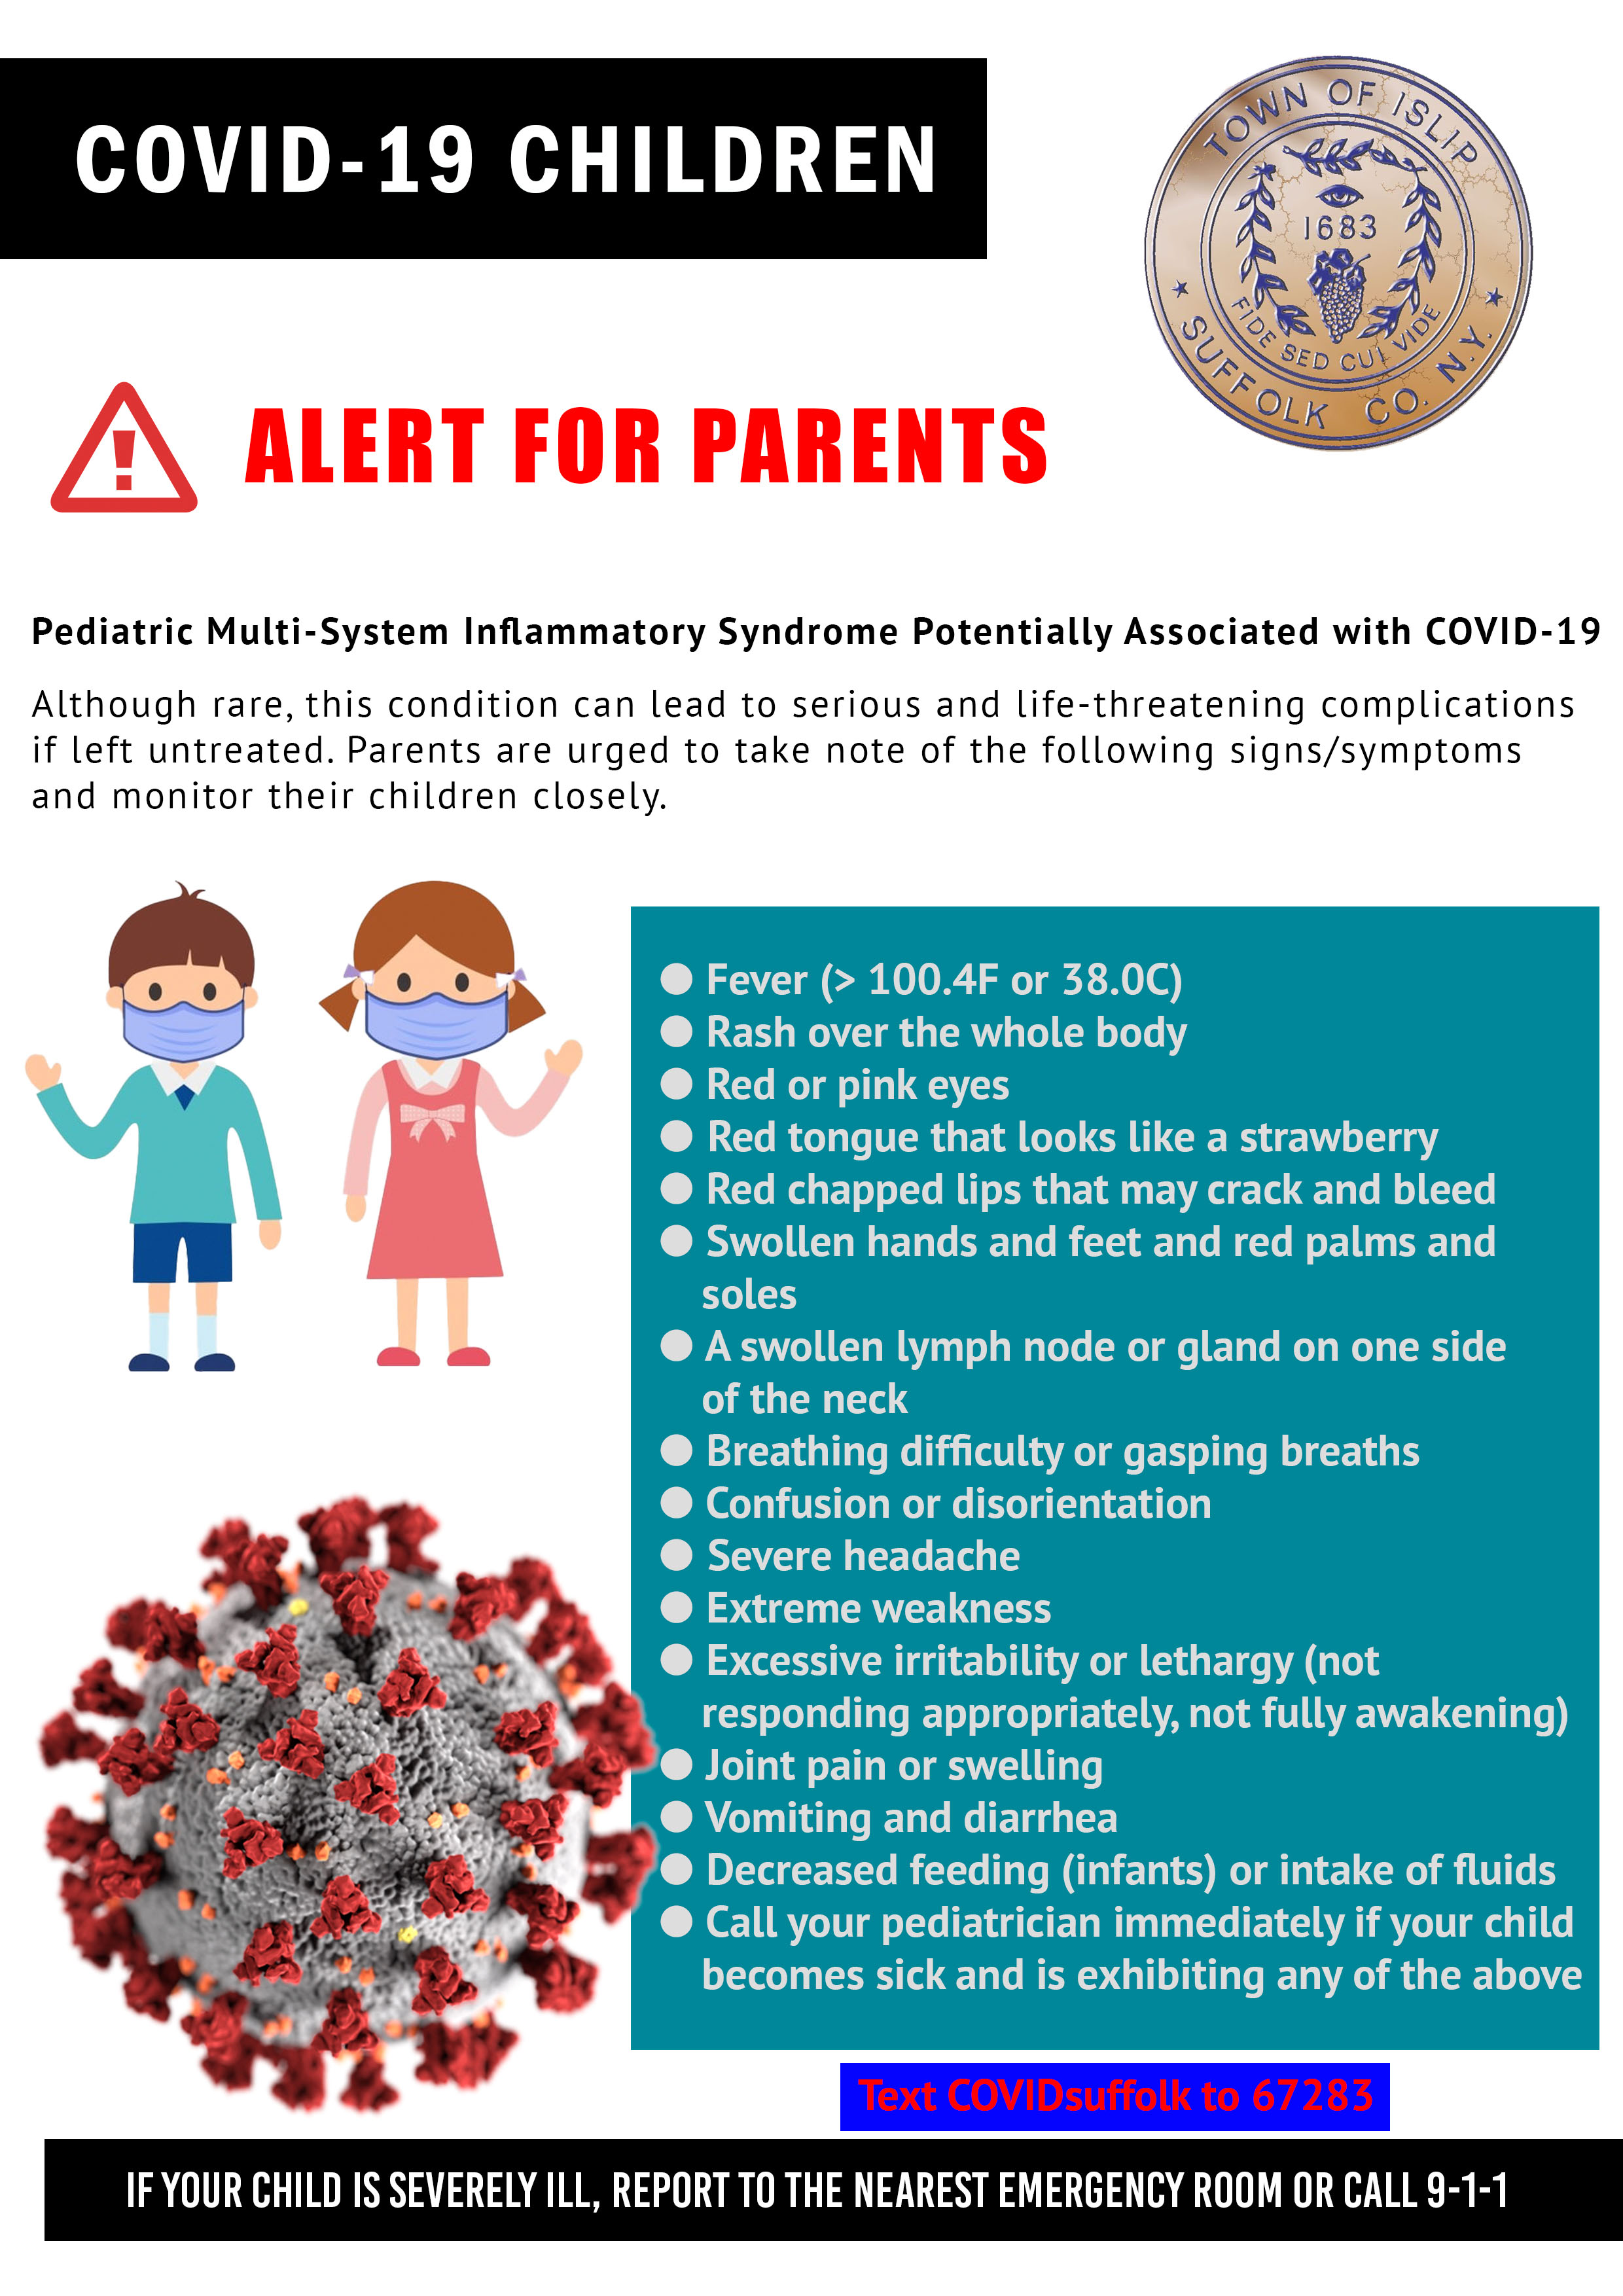 A graphic showing the warning signs of COVID-19 Children's related illness